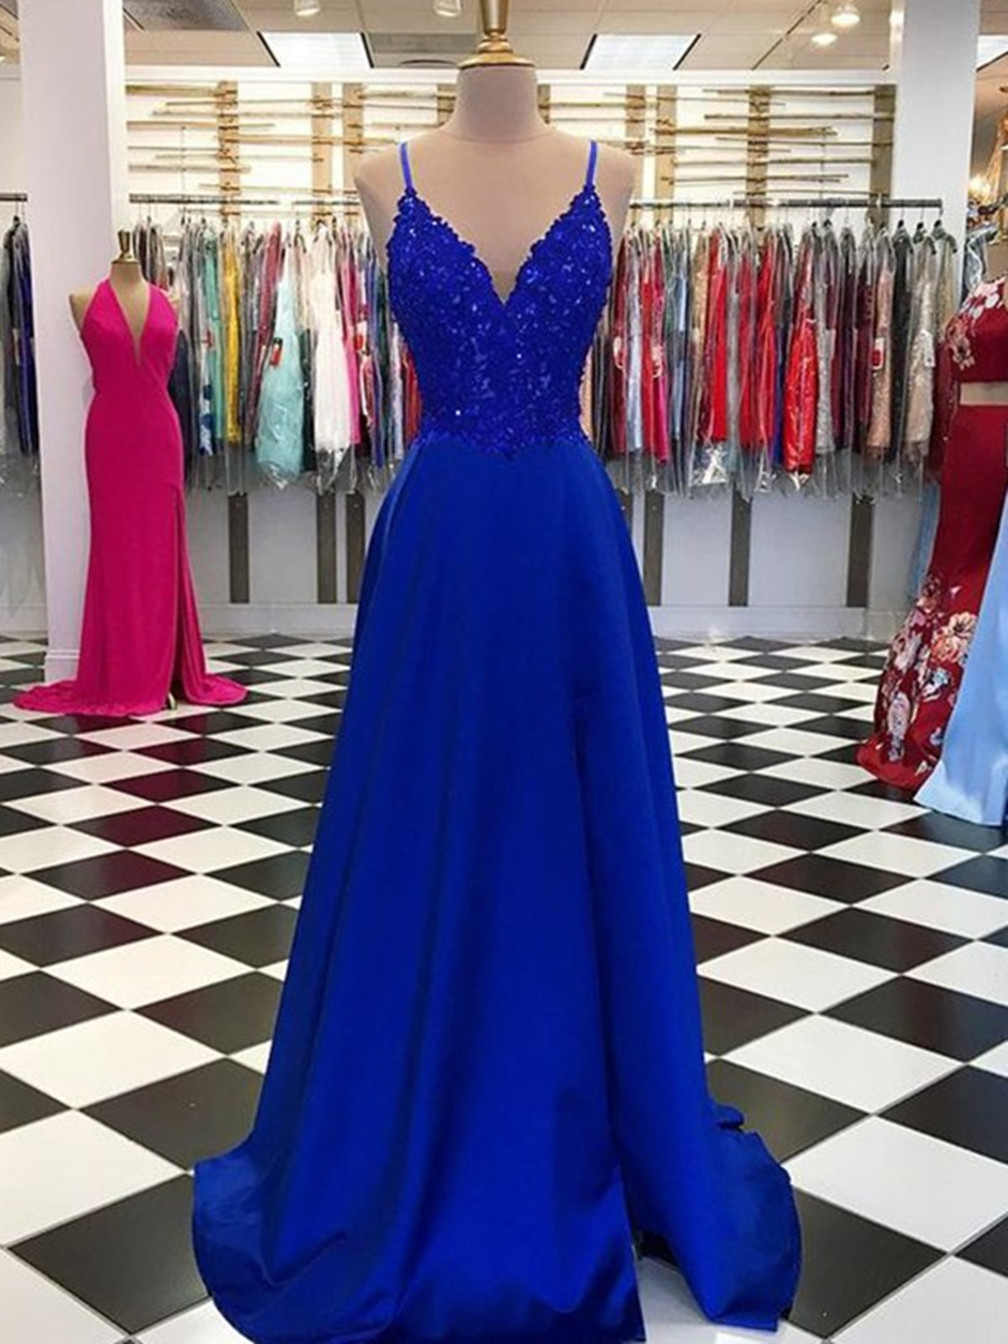 Women A-line/princess Prom Dresses Long Appliques V-neck Evening Gowns Sleeveless Formal Party Dress Yp018